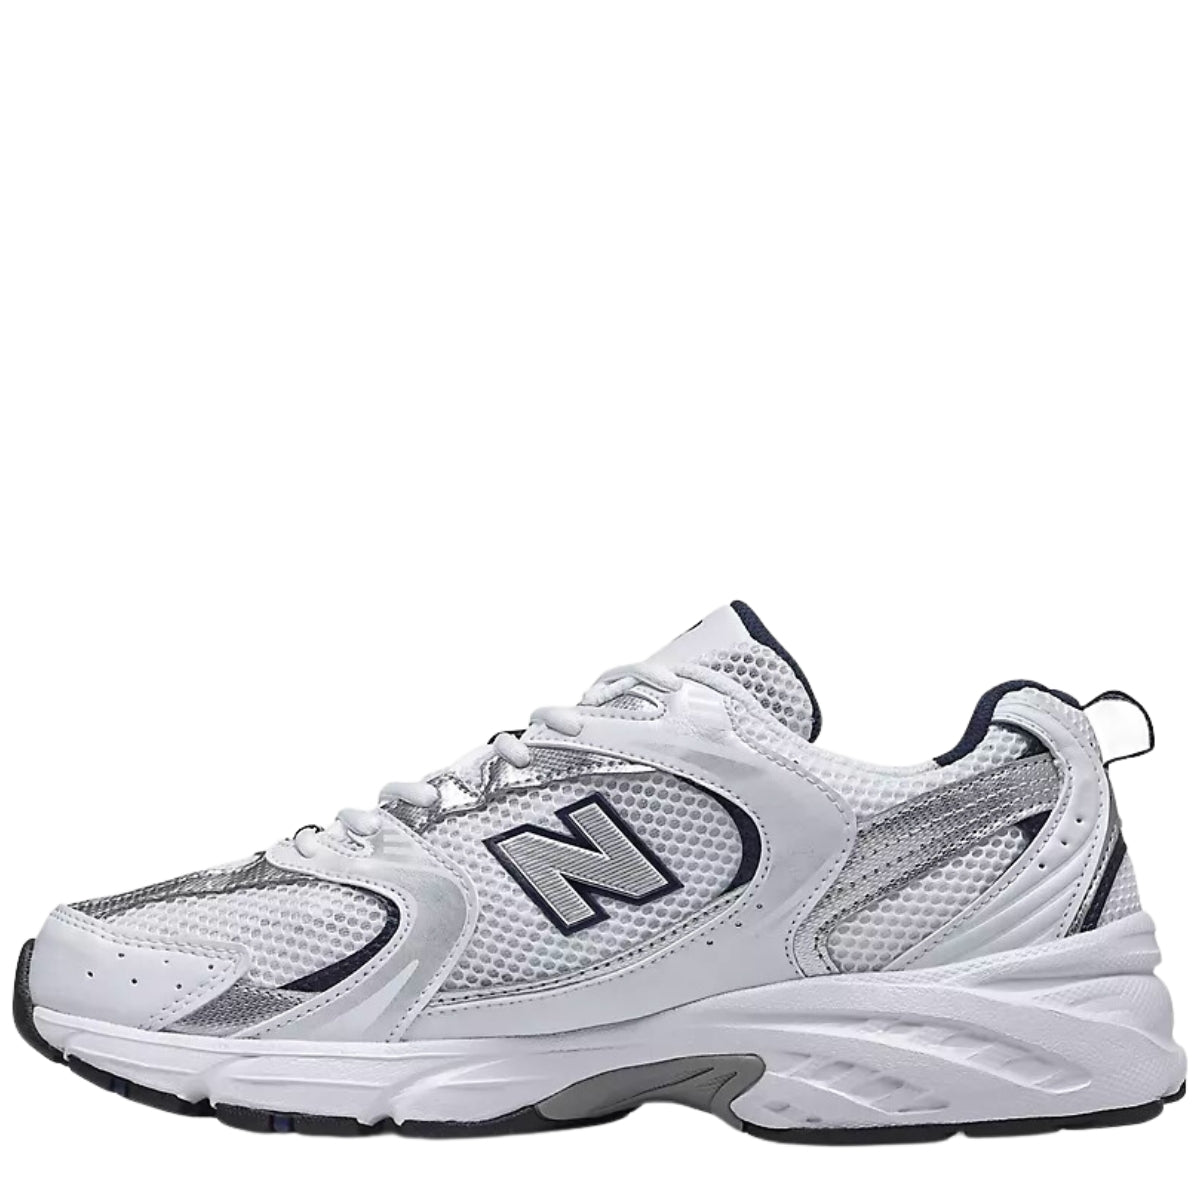 New Balance 530 in White with Natural Indigo